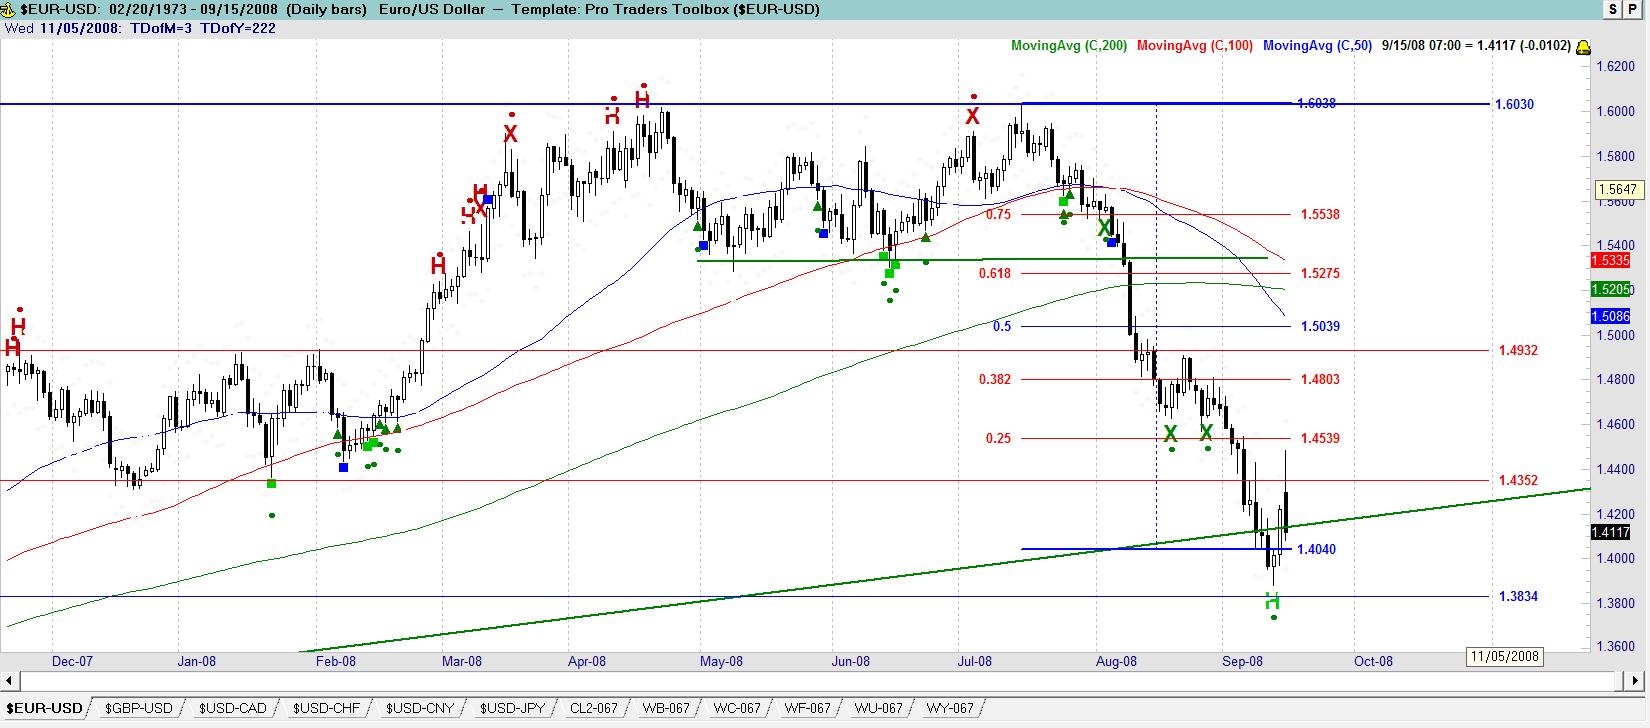 Euro USD Technical Forex Analysis for Day Traders